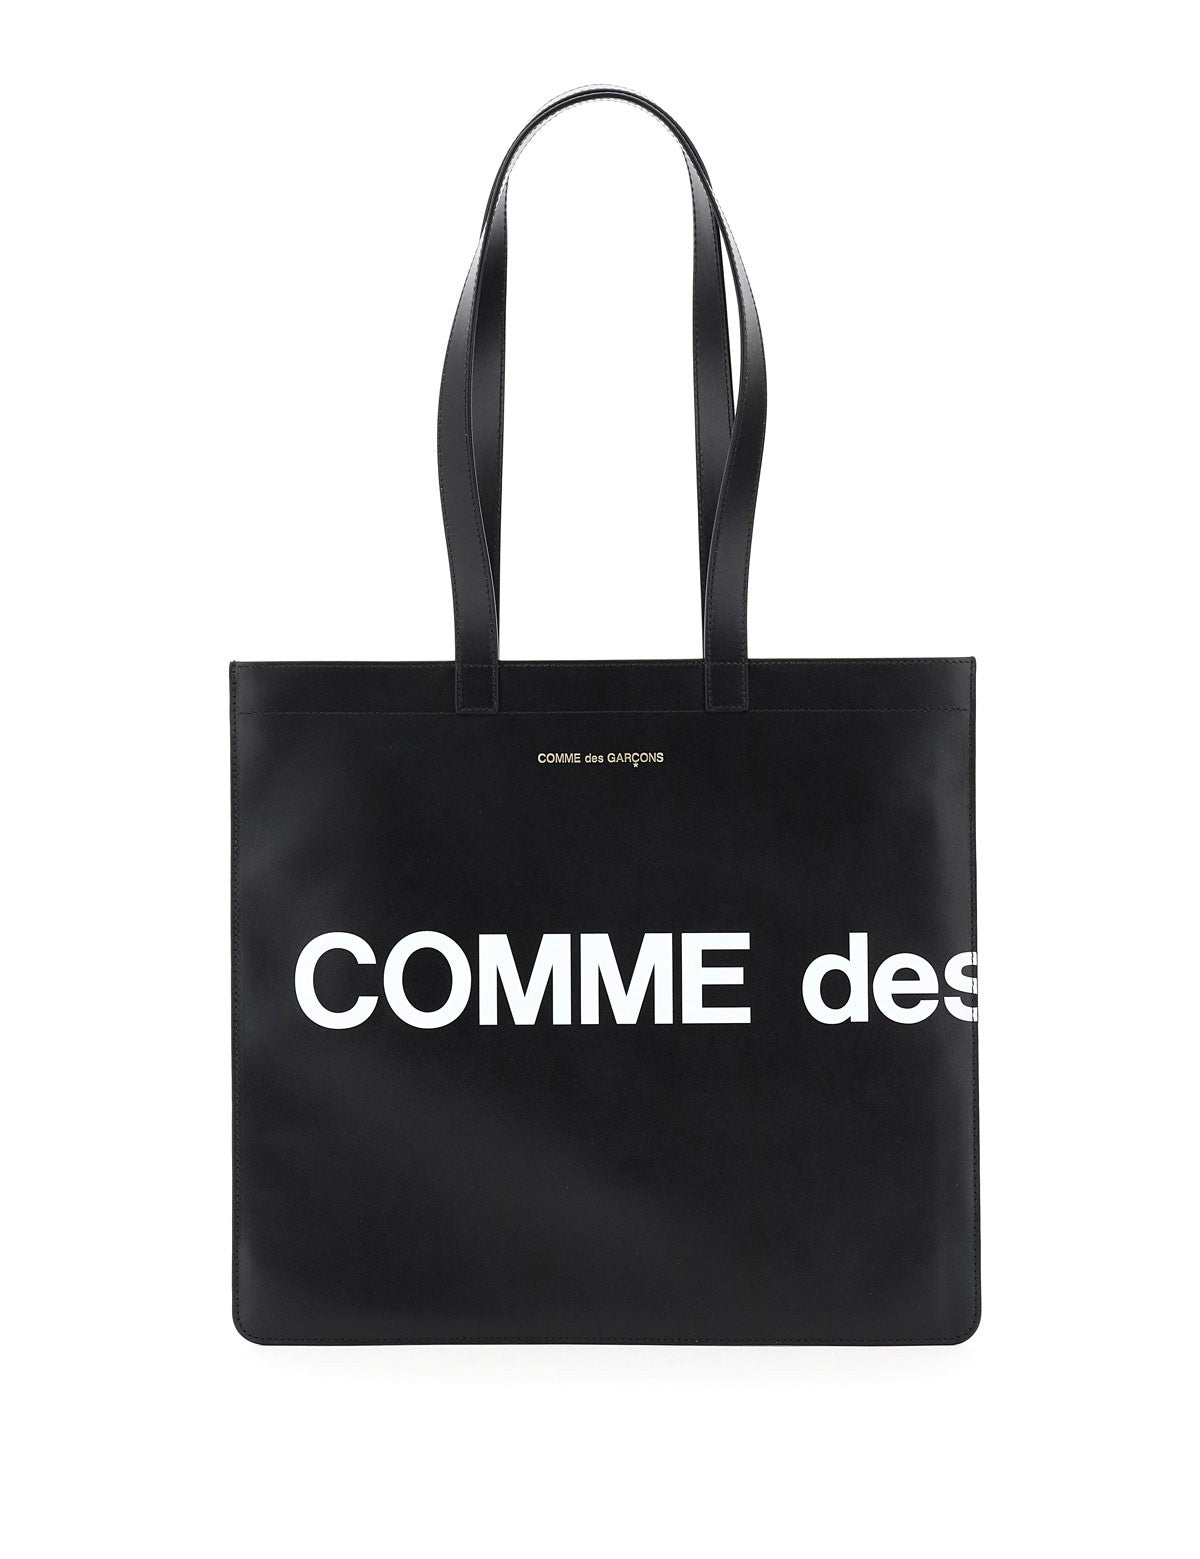 comme-des-garcons-wallet-leather-tote-bag-with-logo_b26582df-9bcc-4714-b773-ee6855c32f0d.jpg